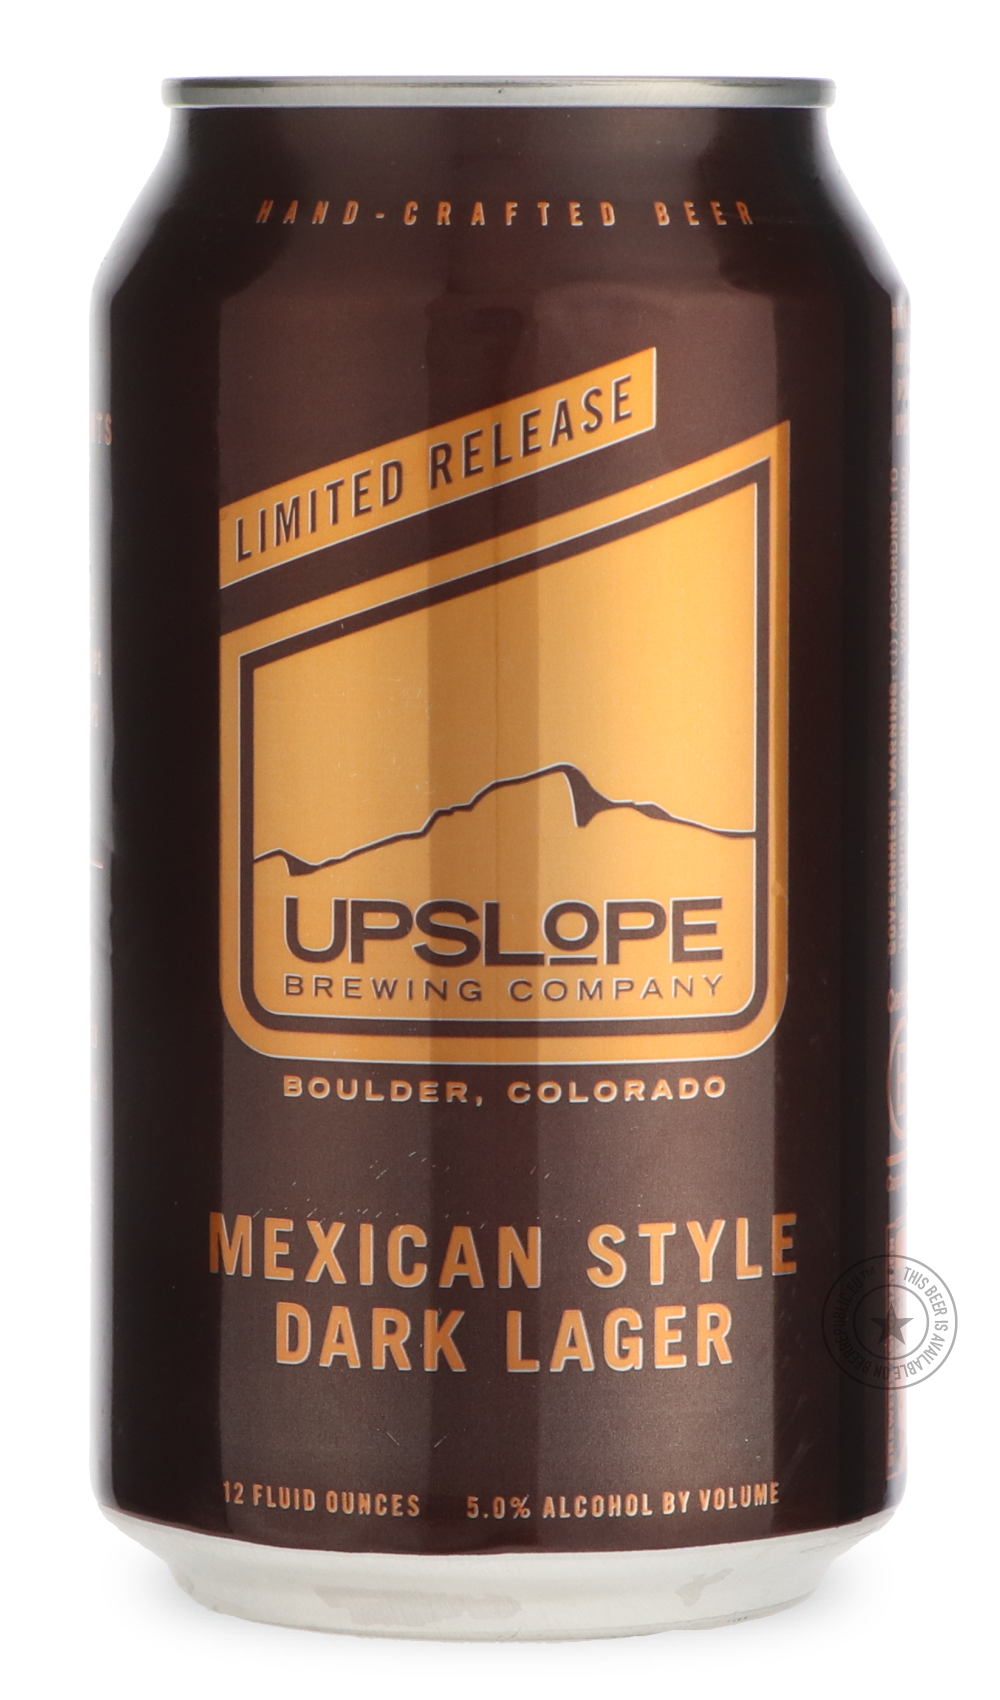 -Upslope- Mexican Style Dark Lager-Brown & Dark- Only @ Beer Republic - The best online beer store for American & Canadian craft beer - Buy beer online from the USA and Canada - Bier online kopen - Amerikaans bier kopen - Craft beer store - Craft beer kopen - Amerikanisch bier kaufen - Bier online kaufen - Acheter biere online - IPA - Stout - Porter - New England IPA - Hazy IPA - Imperial Stout - Barrel Aged - Barrel Aged Imperial Stout - Brown - Dark beer - Blond - Blonde - Pilsner - Lager - Wheat - Weizen